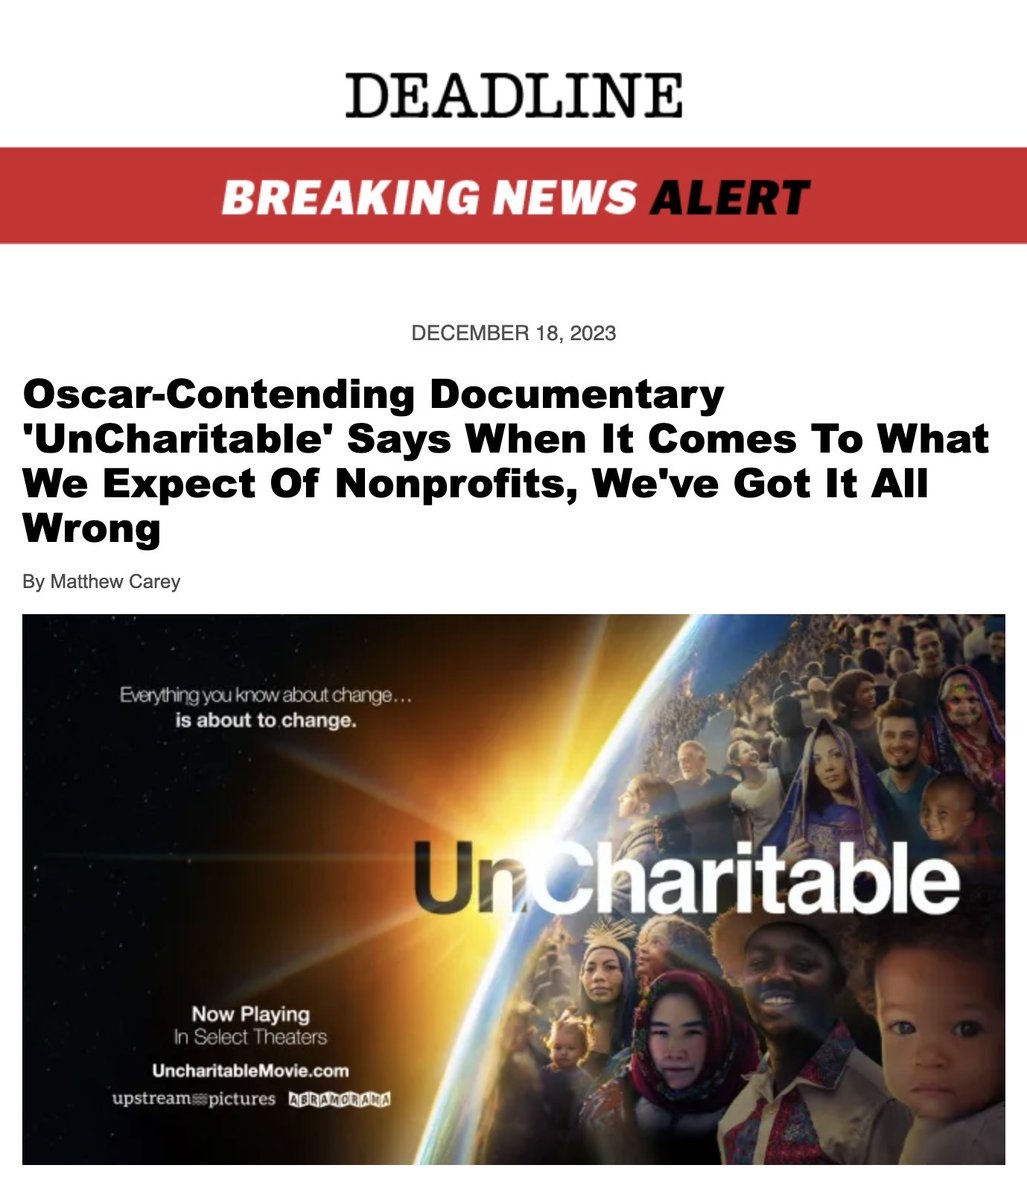 A @deadline exclusive! Matthew Carey covers 'Uncharitable' and how the film reframes how we should think about nonprofits... Read the full article now! deadline.com/2023/12/unchar… #uncharitablemovie #dogoodpoints #documentary#nonprofit #december #philanthropy #oscars